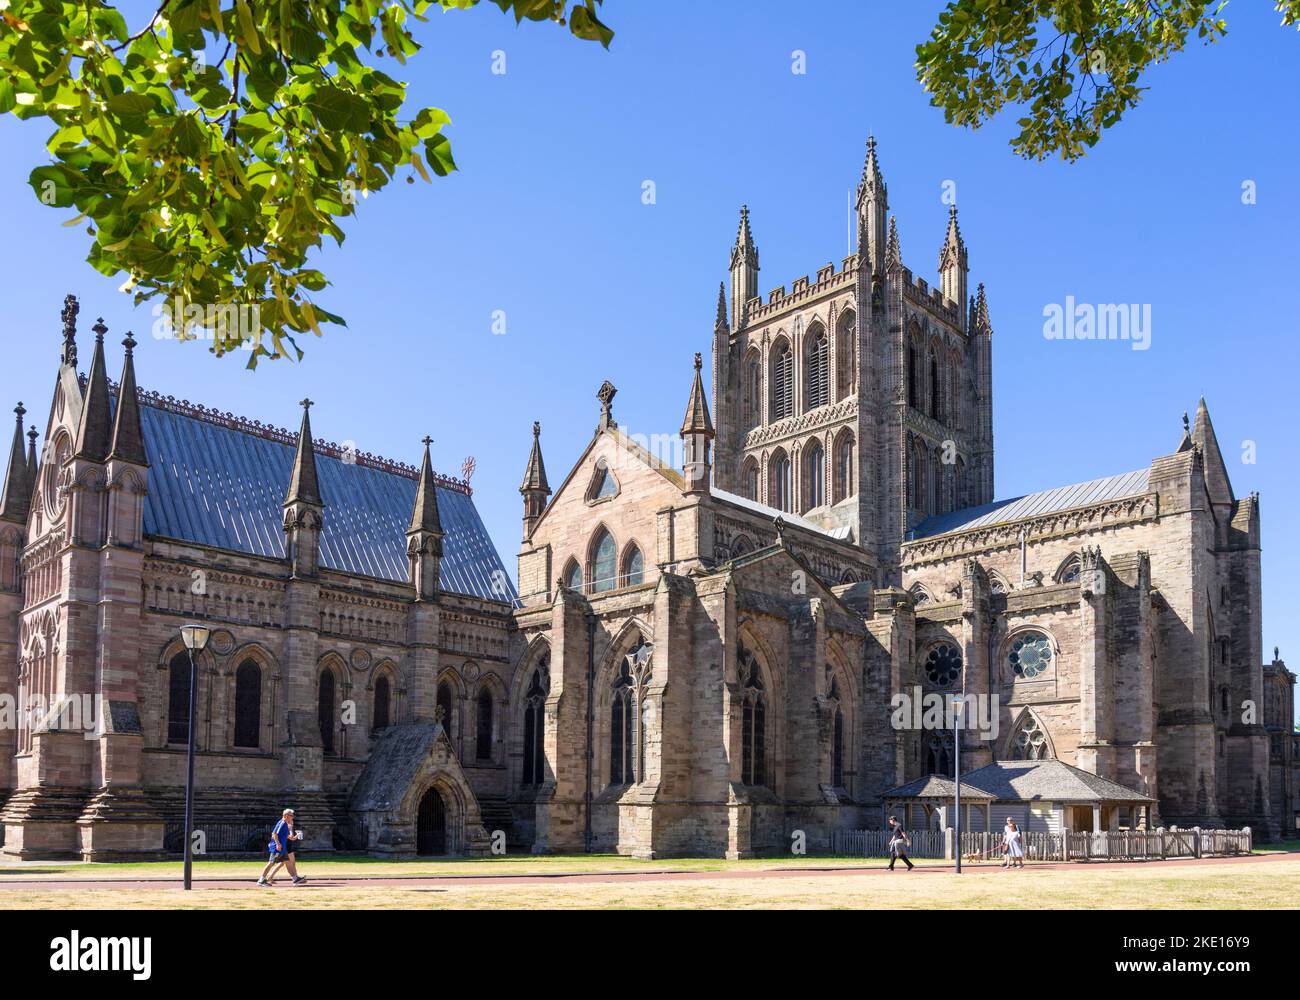 Hereford Cathedral Hereford or the Cathedral of Saint Mary the Virgin and Saint Ethelbert the King Hereford Herefordshire England UK GB Europe Stock Photo